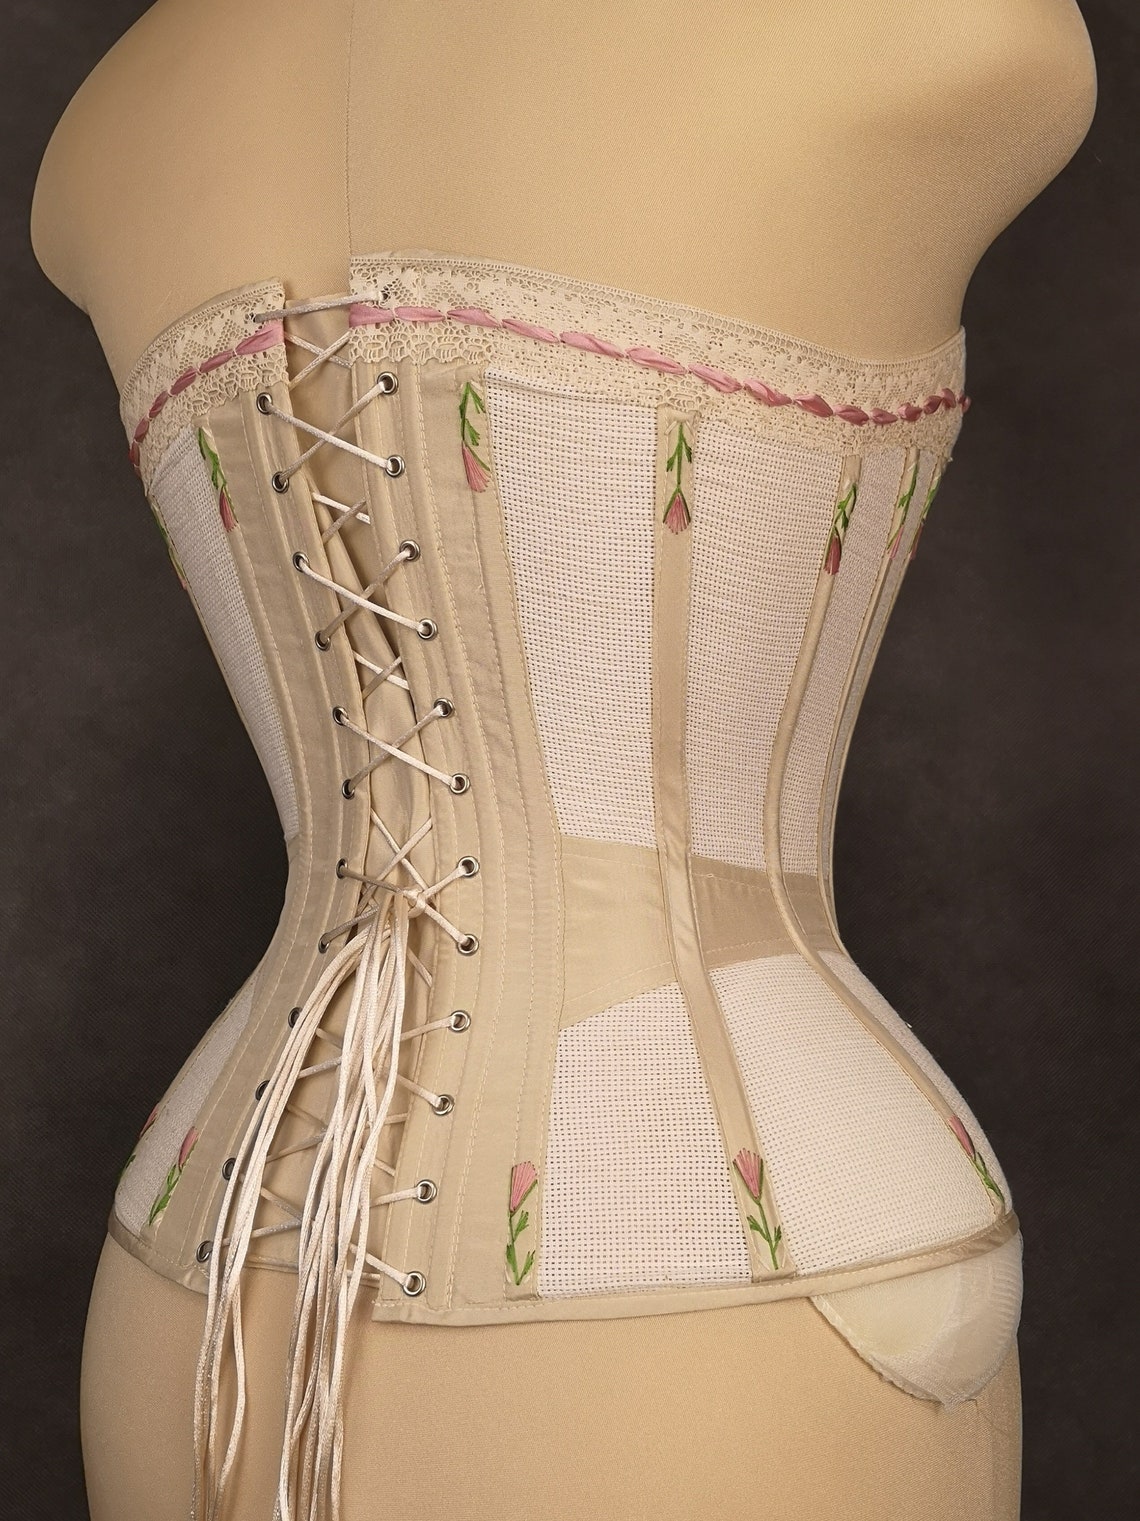 Ventilated Victorian Corset Made To Measure Edwardian Stays Etsy 